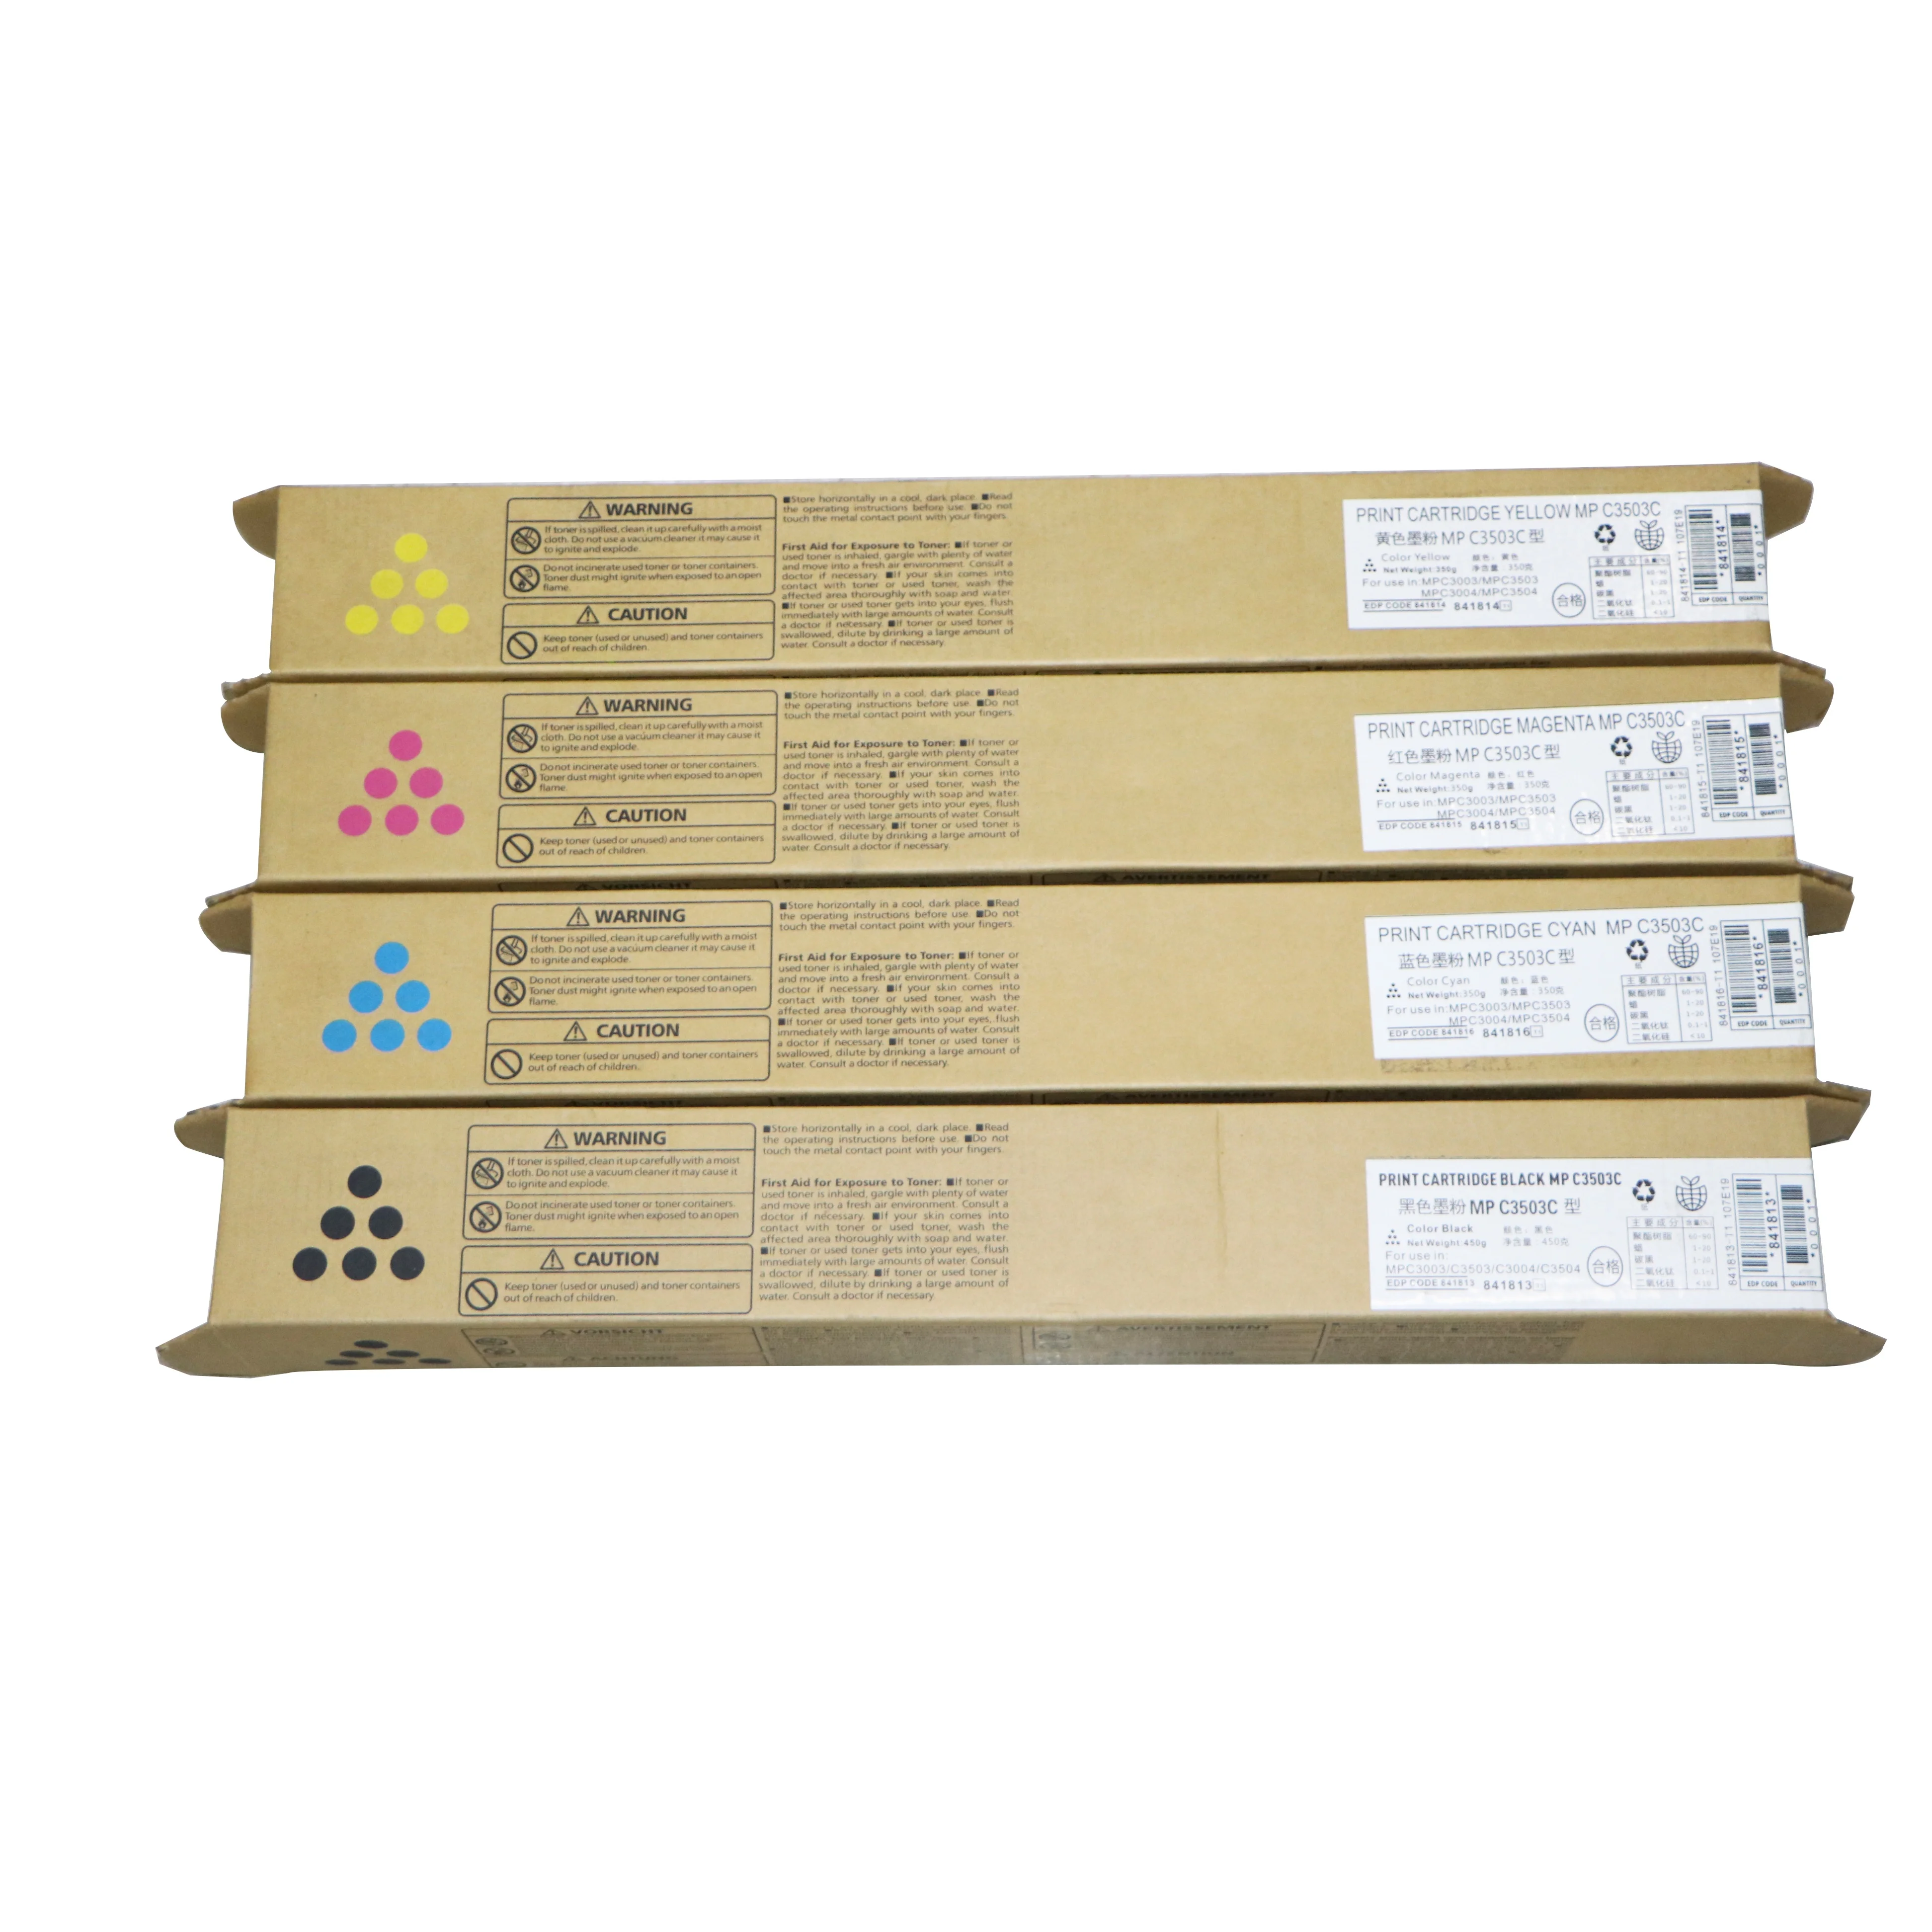 GREENBOX Remanufactured Toner Cartridge Replacement for Ricoh Aficio C3003 MP C3503 MP C3004 MP C3504-841813 841814 841815 841816 1 Black 1 Cyan 1 Magenta 1 Yellow, 4-Pack, High Yield 29,500 Pages 